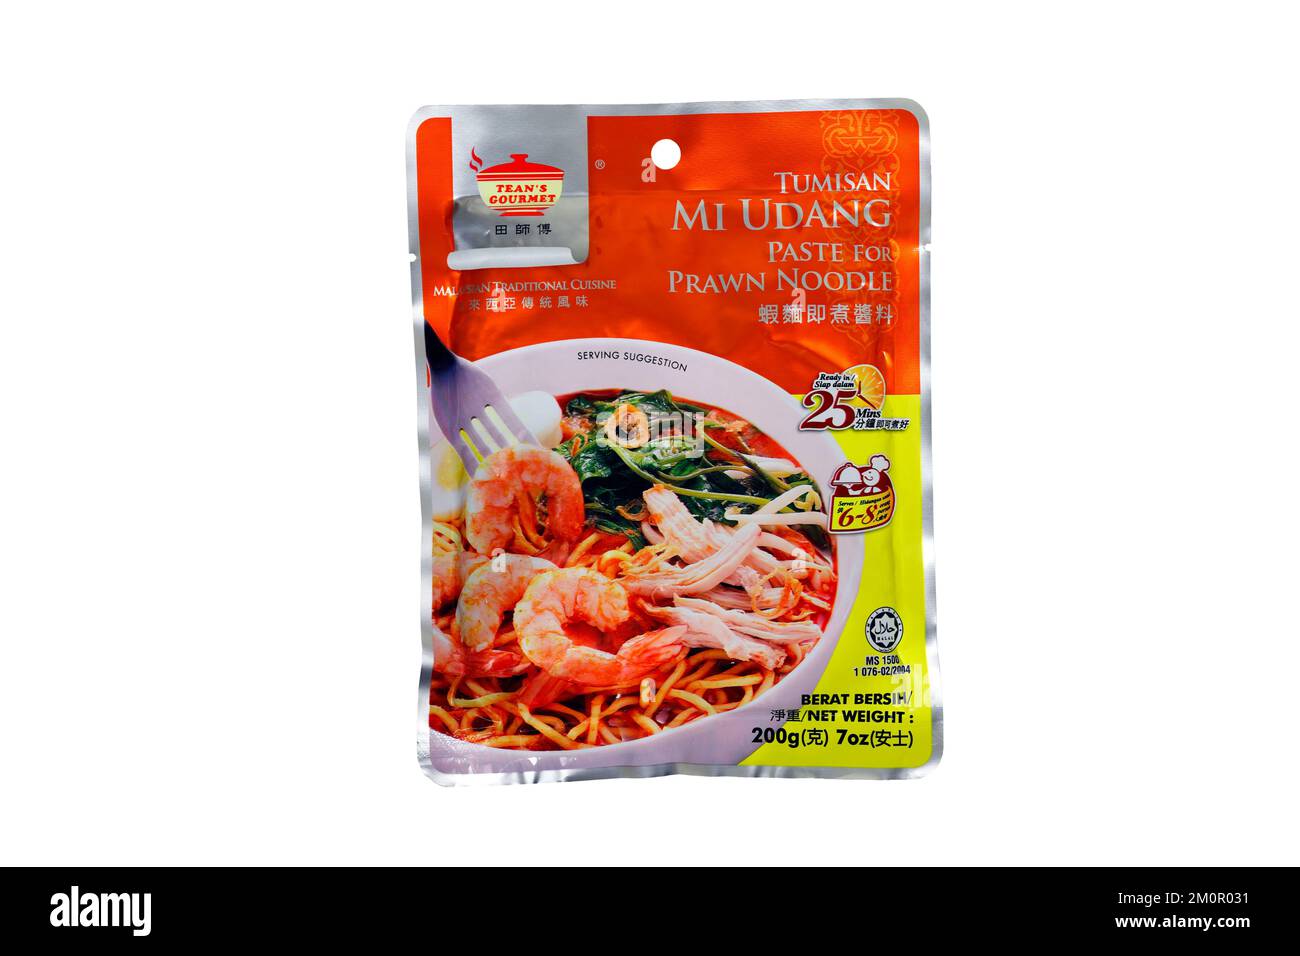 A packet of Tean's Gourmet Tumisan Mi Udang prawn noodle paste isolated on a white background. cutout image for illustration and editorial use. Stock Photo